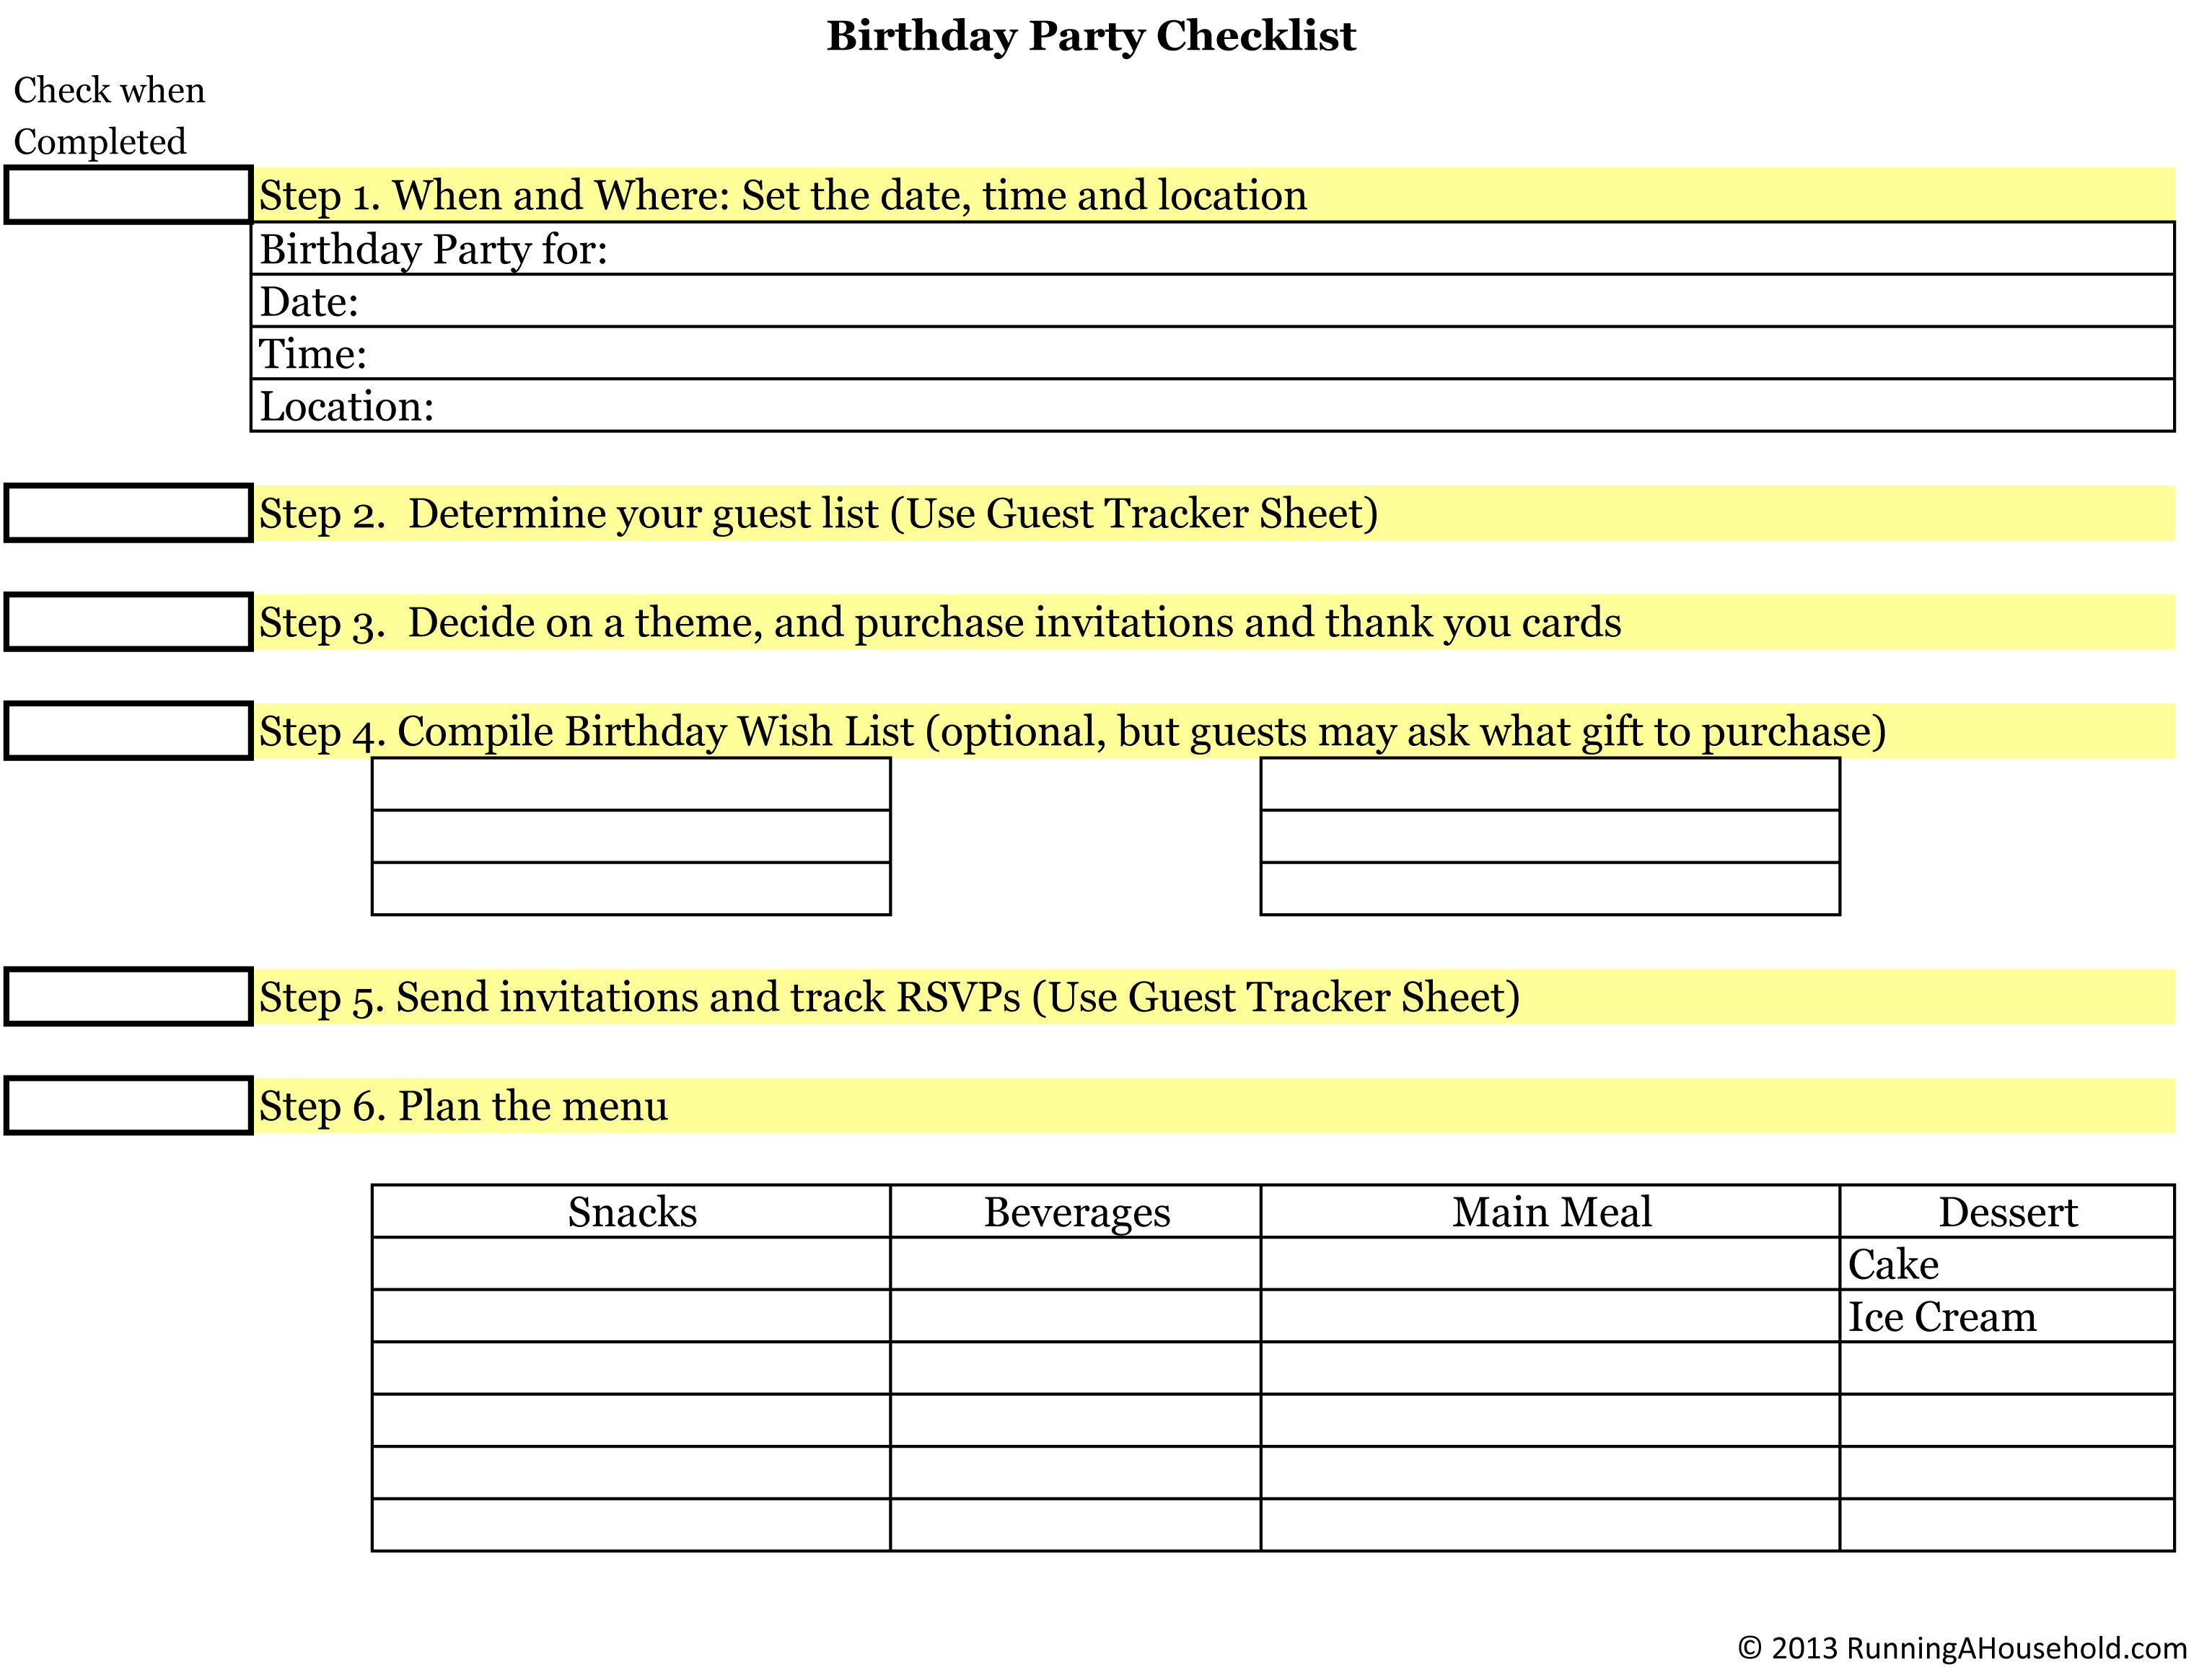 Planning A Birthday Party Checklist Template